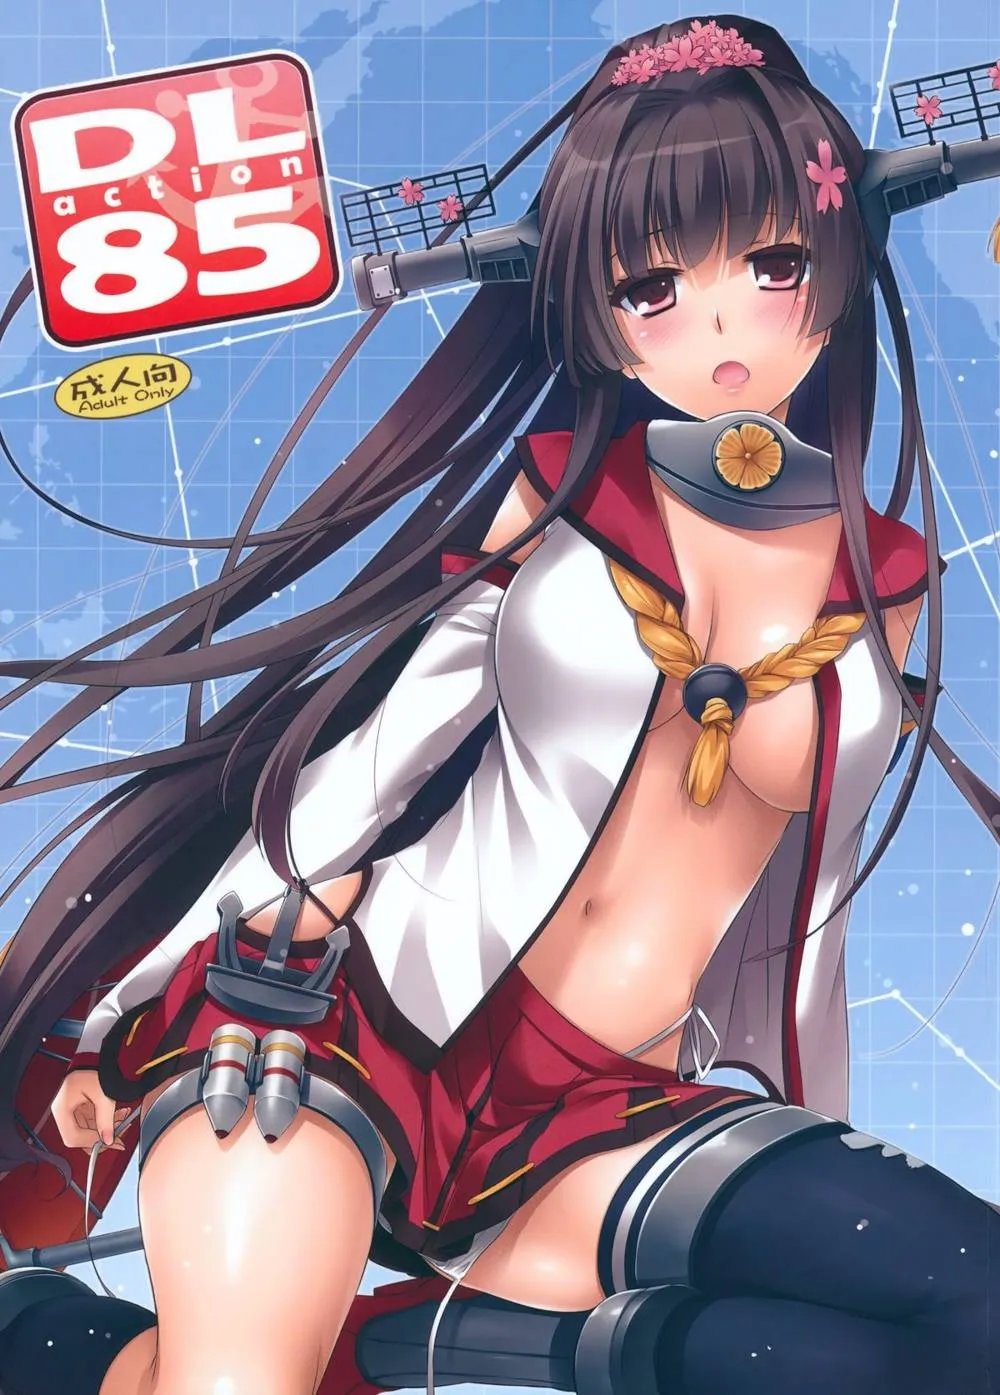 Kantai Collection,D.L. Action 85 [Japanese][第2页]